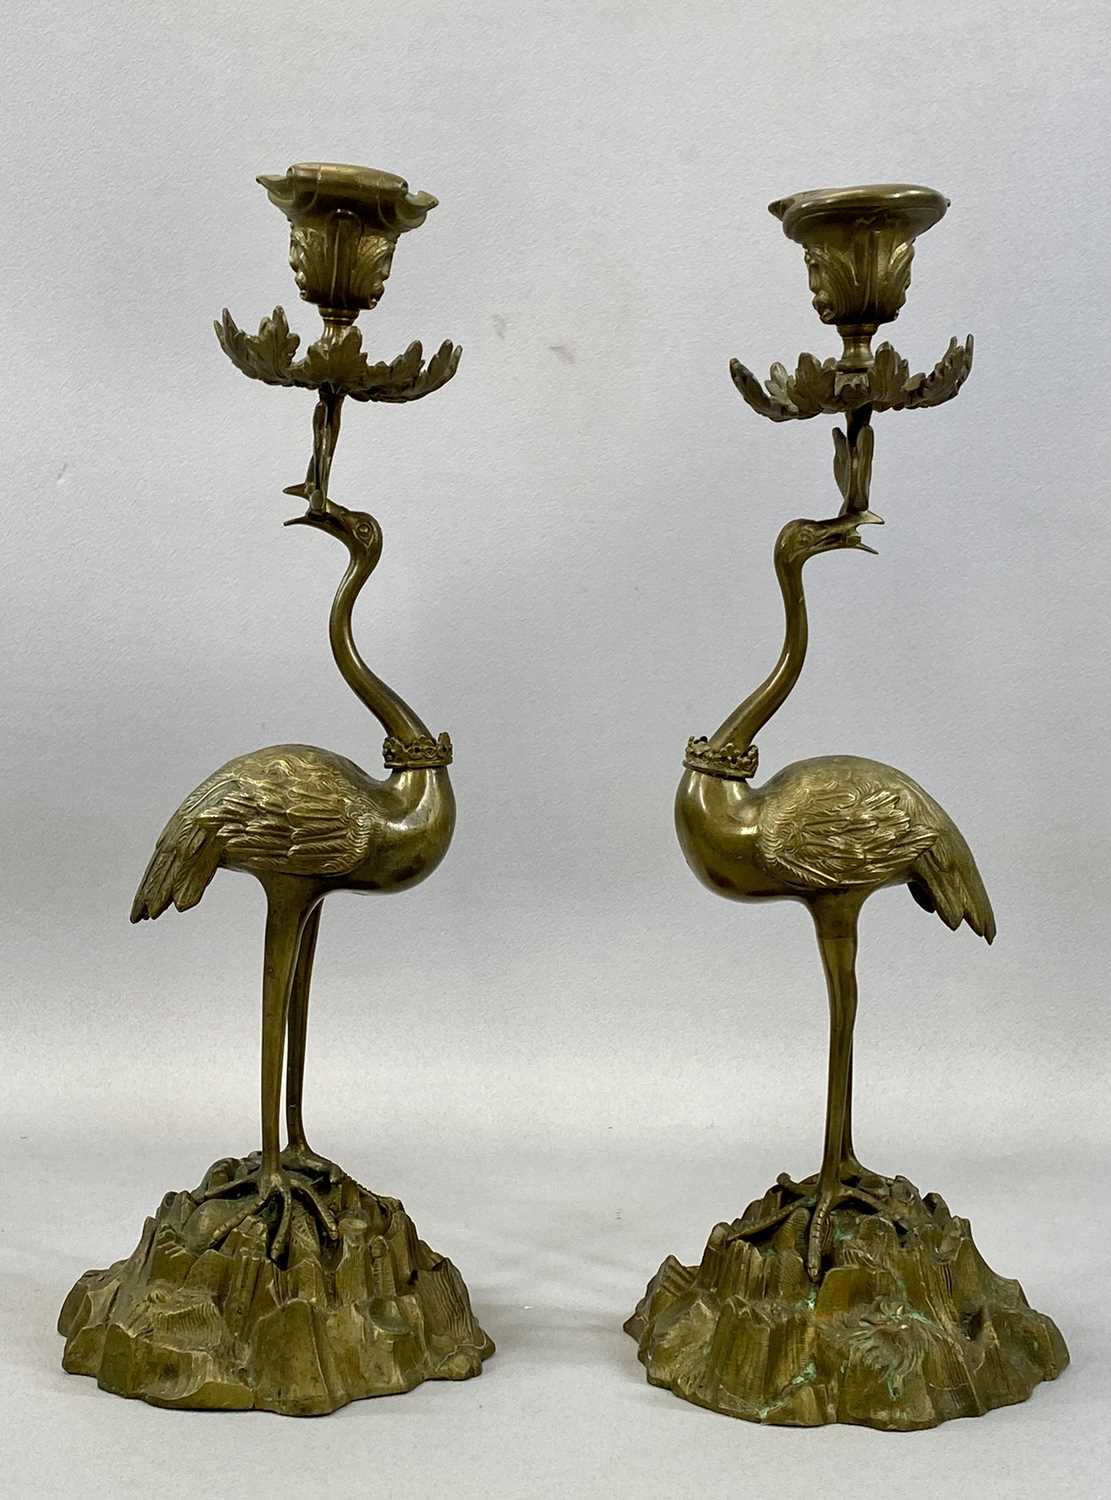 PAIR OF REGENCY STYLE BRASS CANDLESTICKS modelled as cranes standing on naturalistic bases,